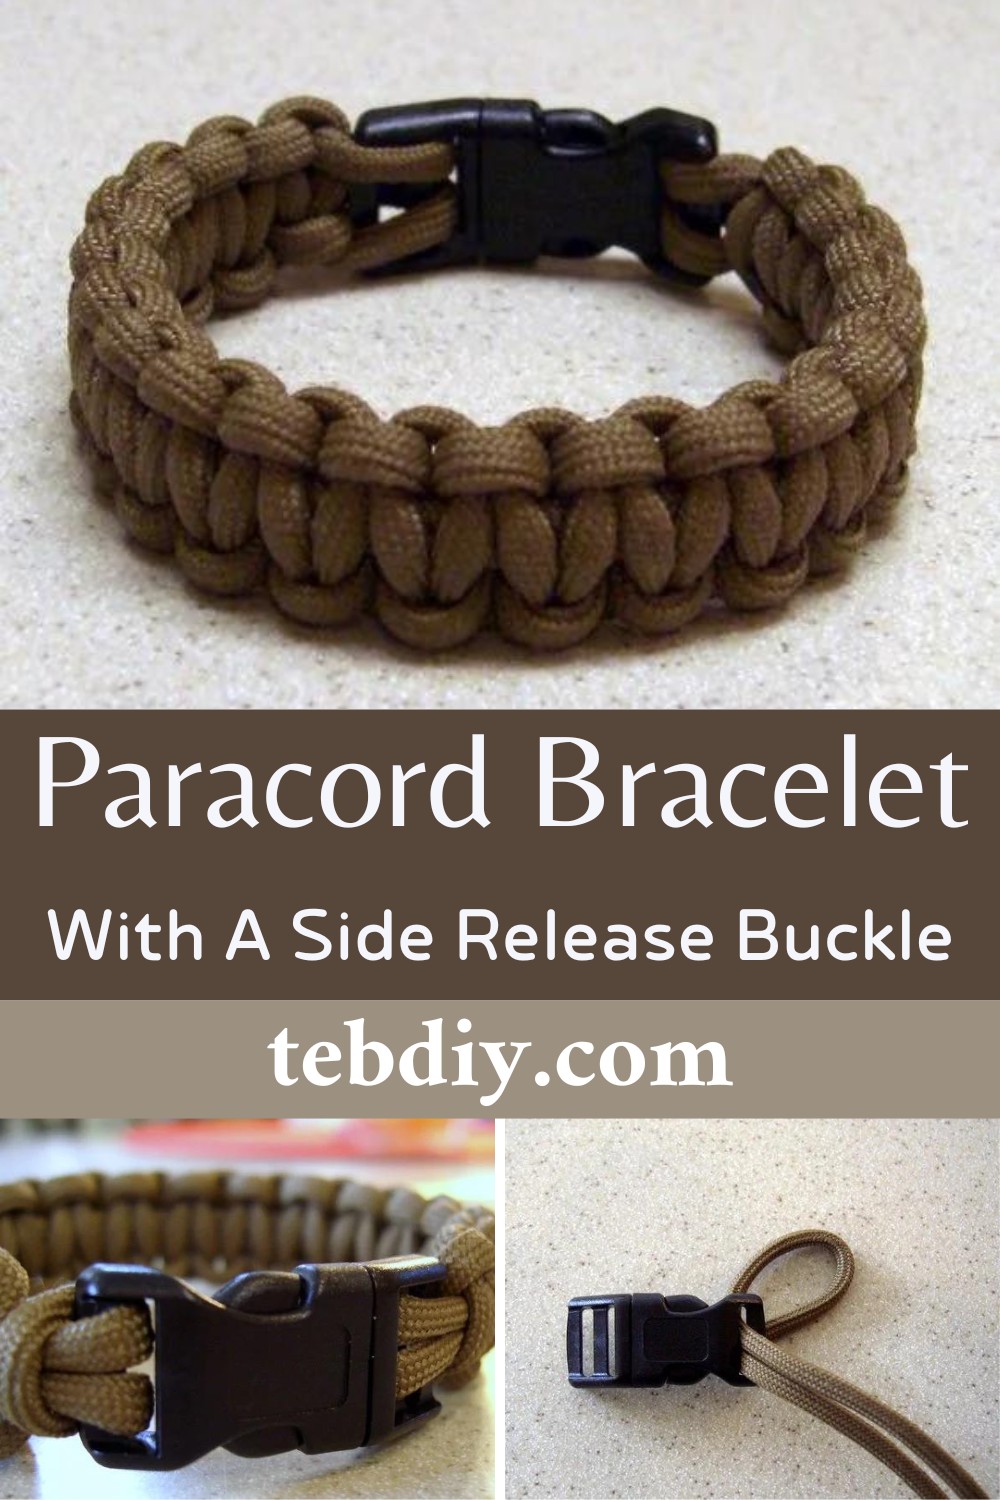 Paracord Bracelet With A Side Release Buckle